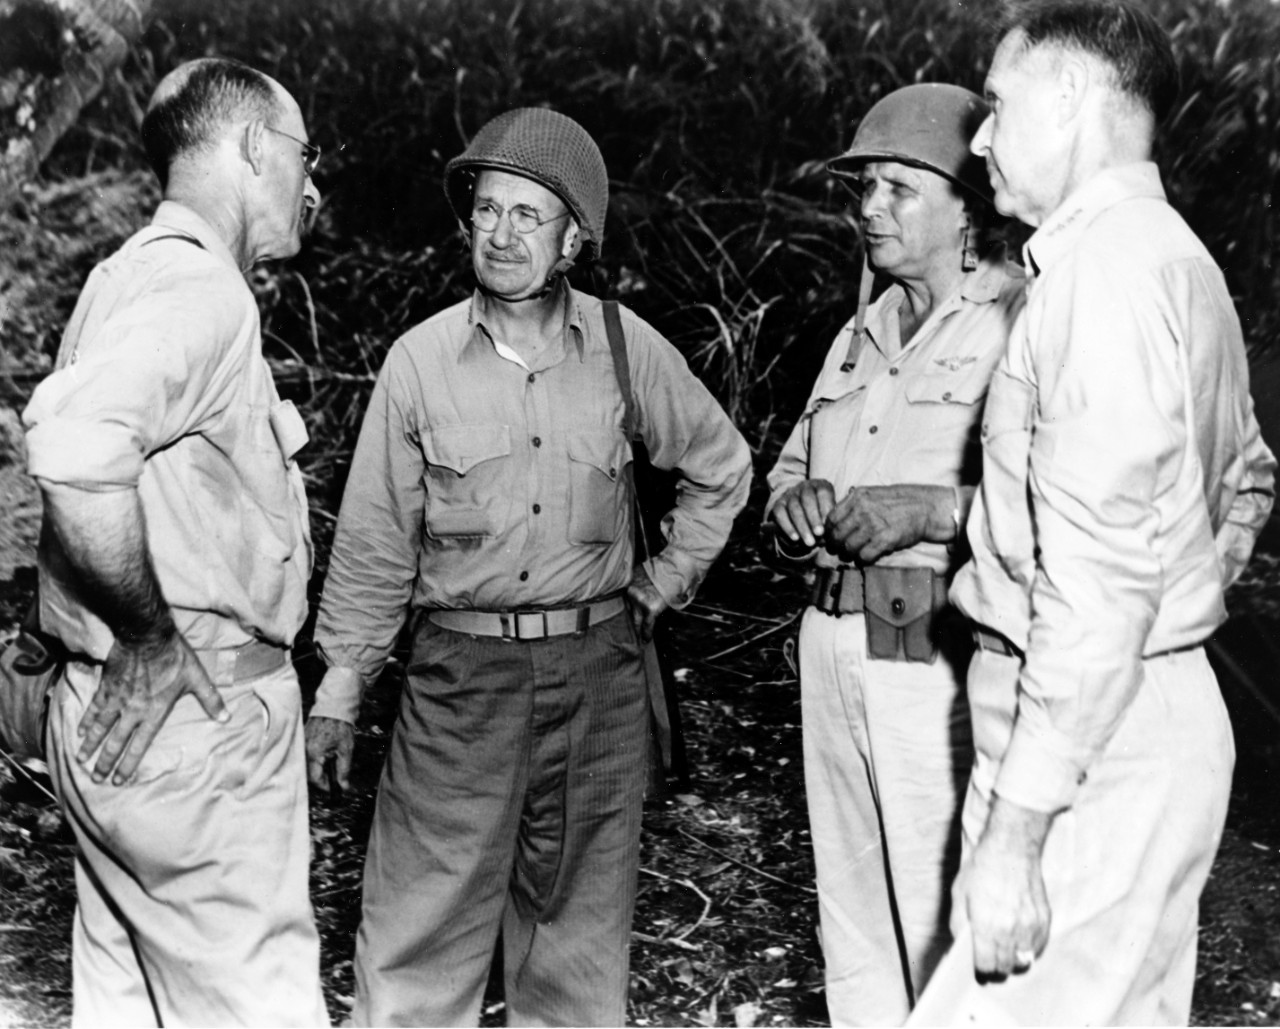 Photo #: 80-G-241218  Conference on Guam, August 1944